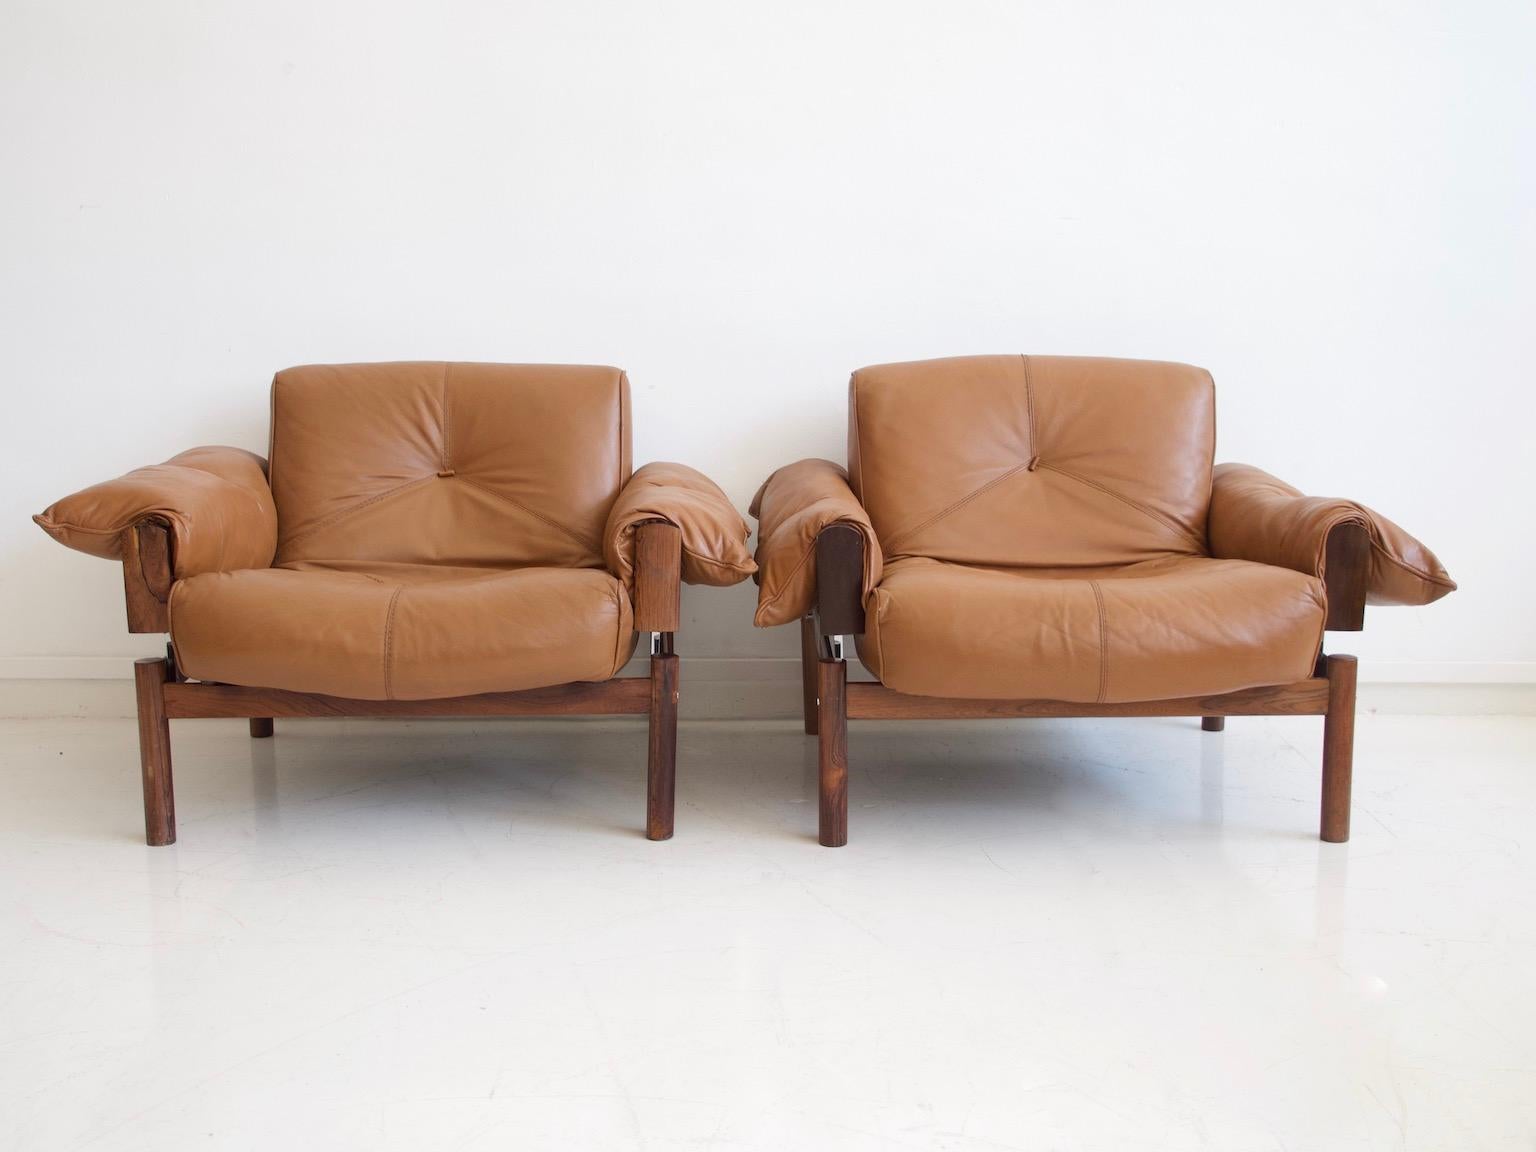 Pair of lounge chairs designed by Percival Lafer and manufactured by MP Lafer in Brazil in the 1970s. Frame in hardwood with leather upholstered seats resting on metal rods.